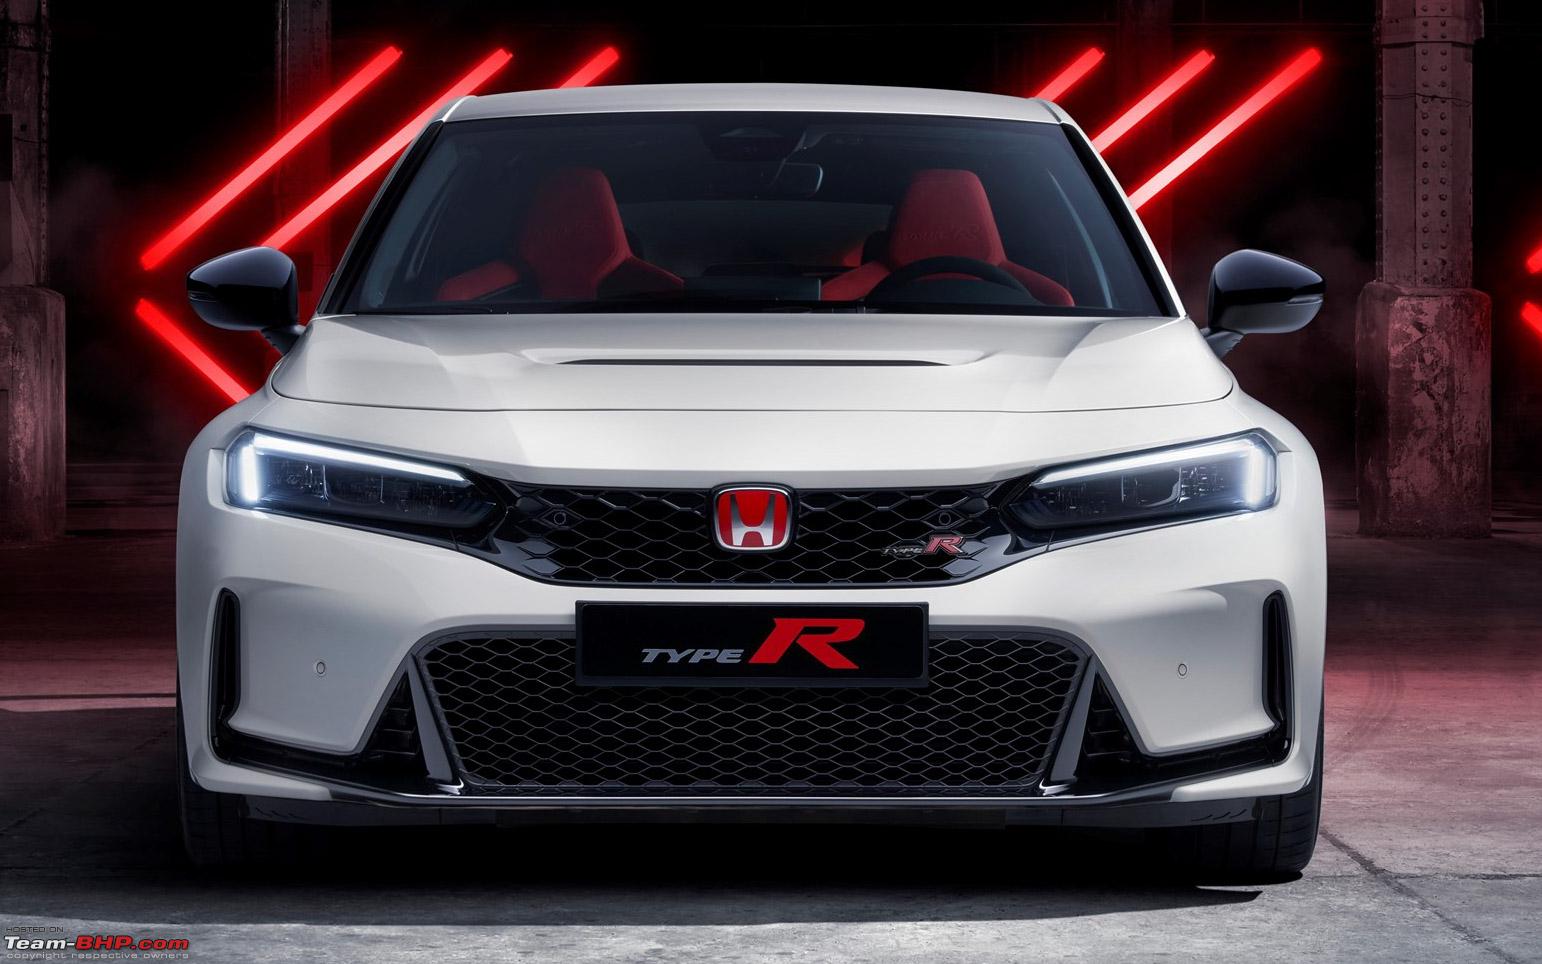 2023 Honda Civic Type R Review: Anything But Ordinary